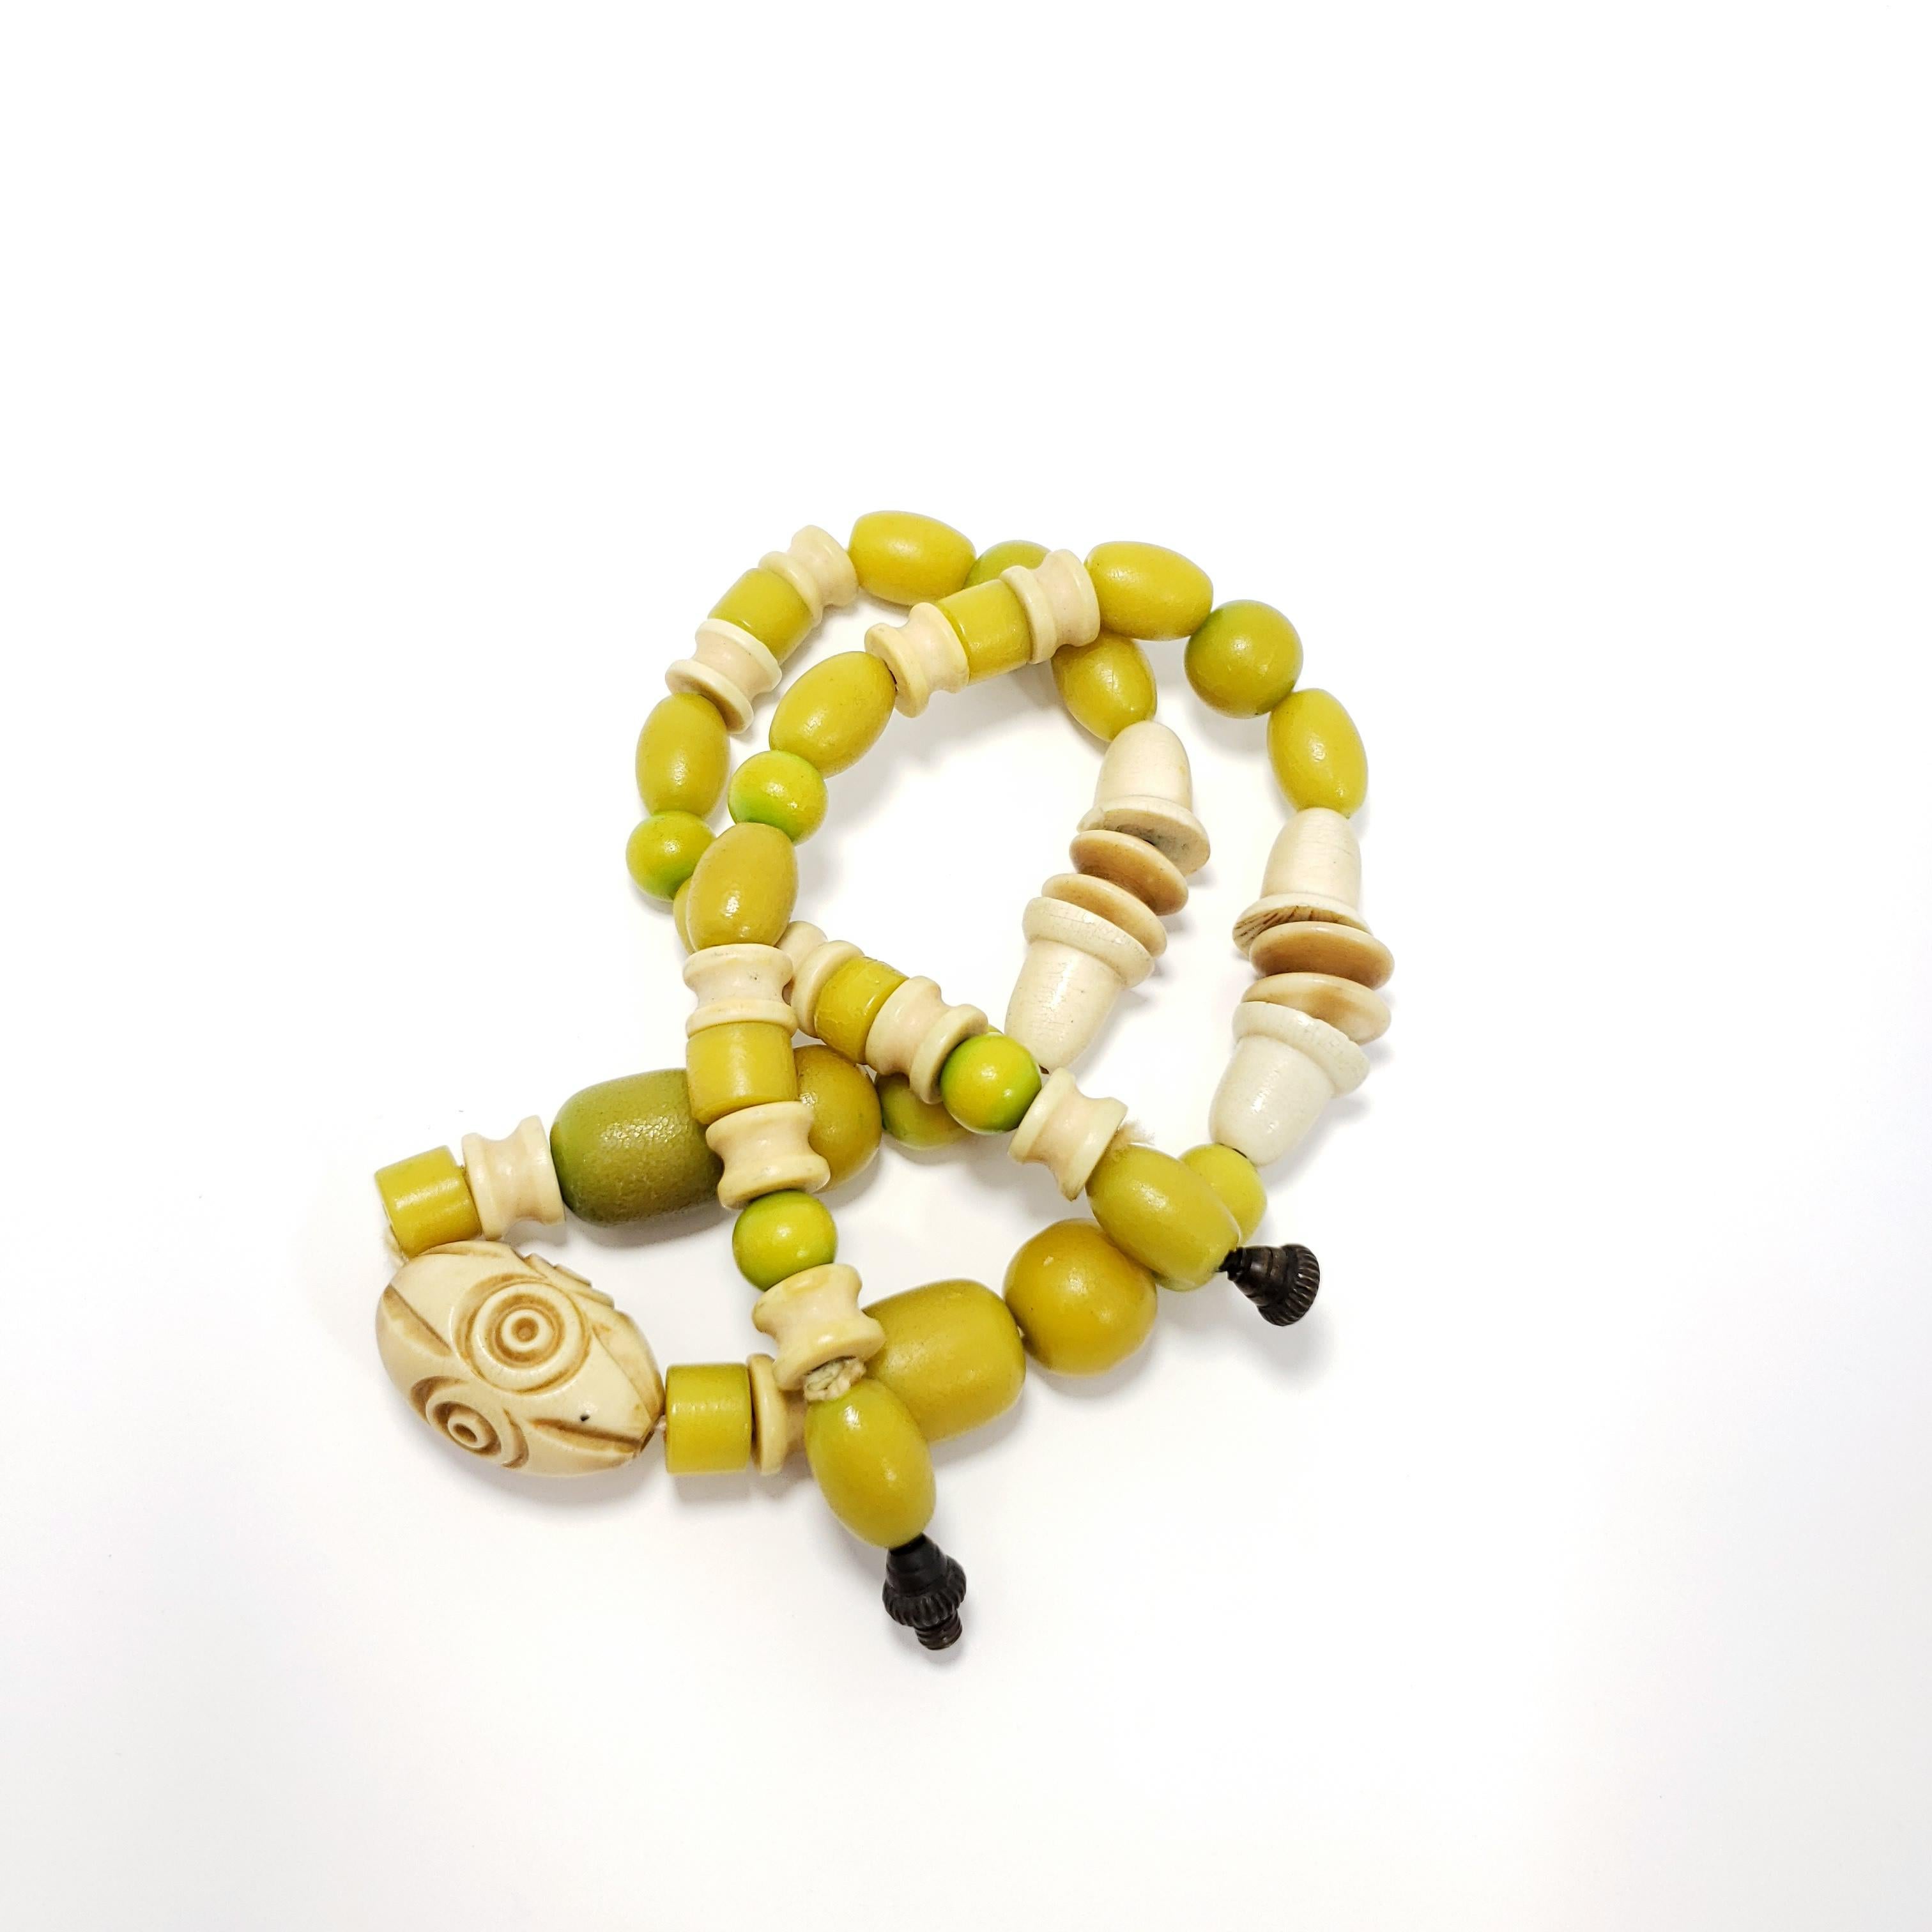 Retro Apple Green and Cream Colored Carved Bakelite Bead Necklace, Brass Tone Clasp For Sale